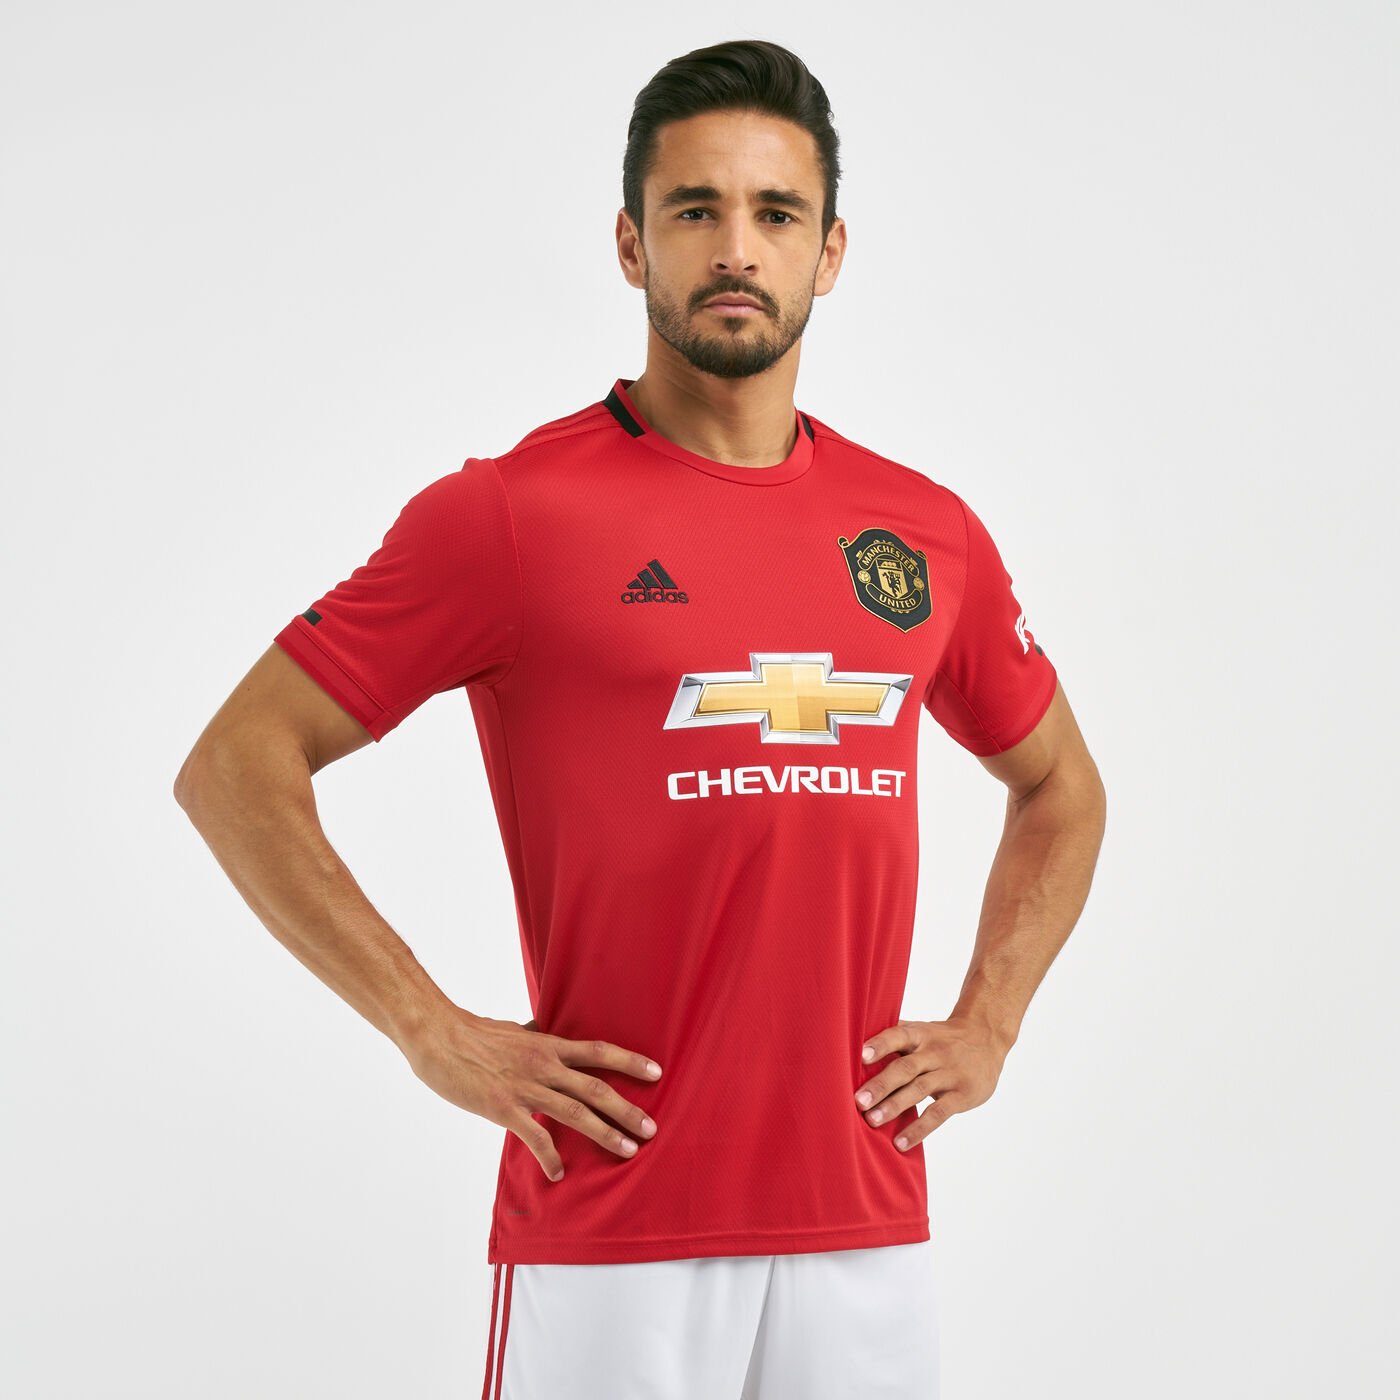 Men's Manchester United FC Home Football Jersey - 2019/20